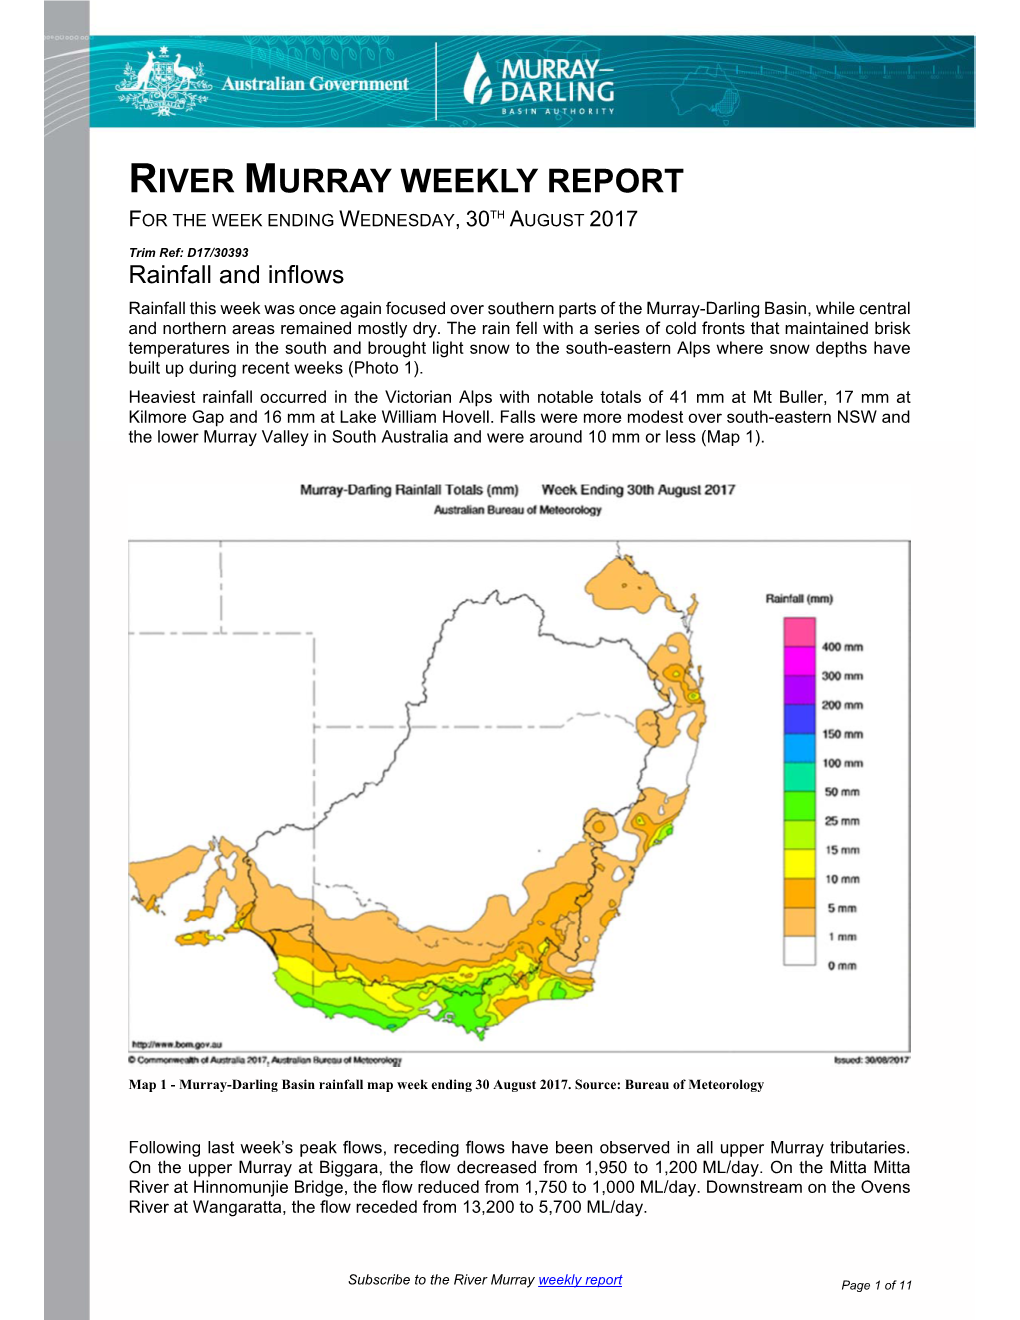 River Murray Operations Weekly Report 30Th August 2017